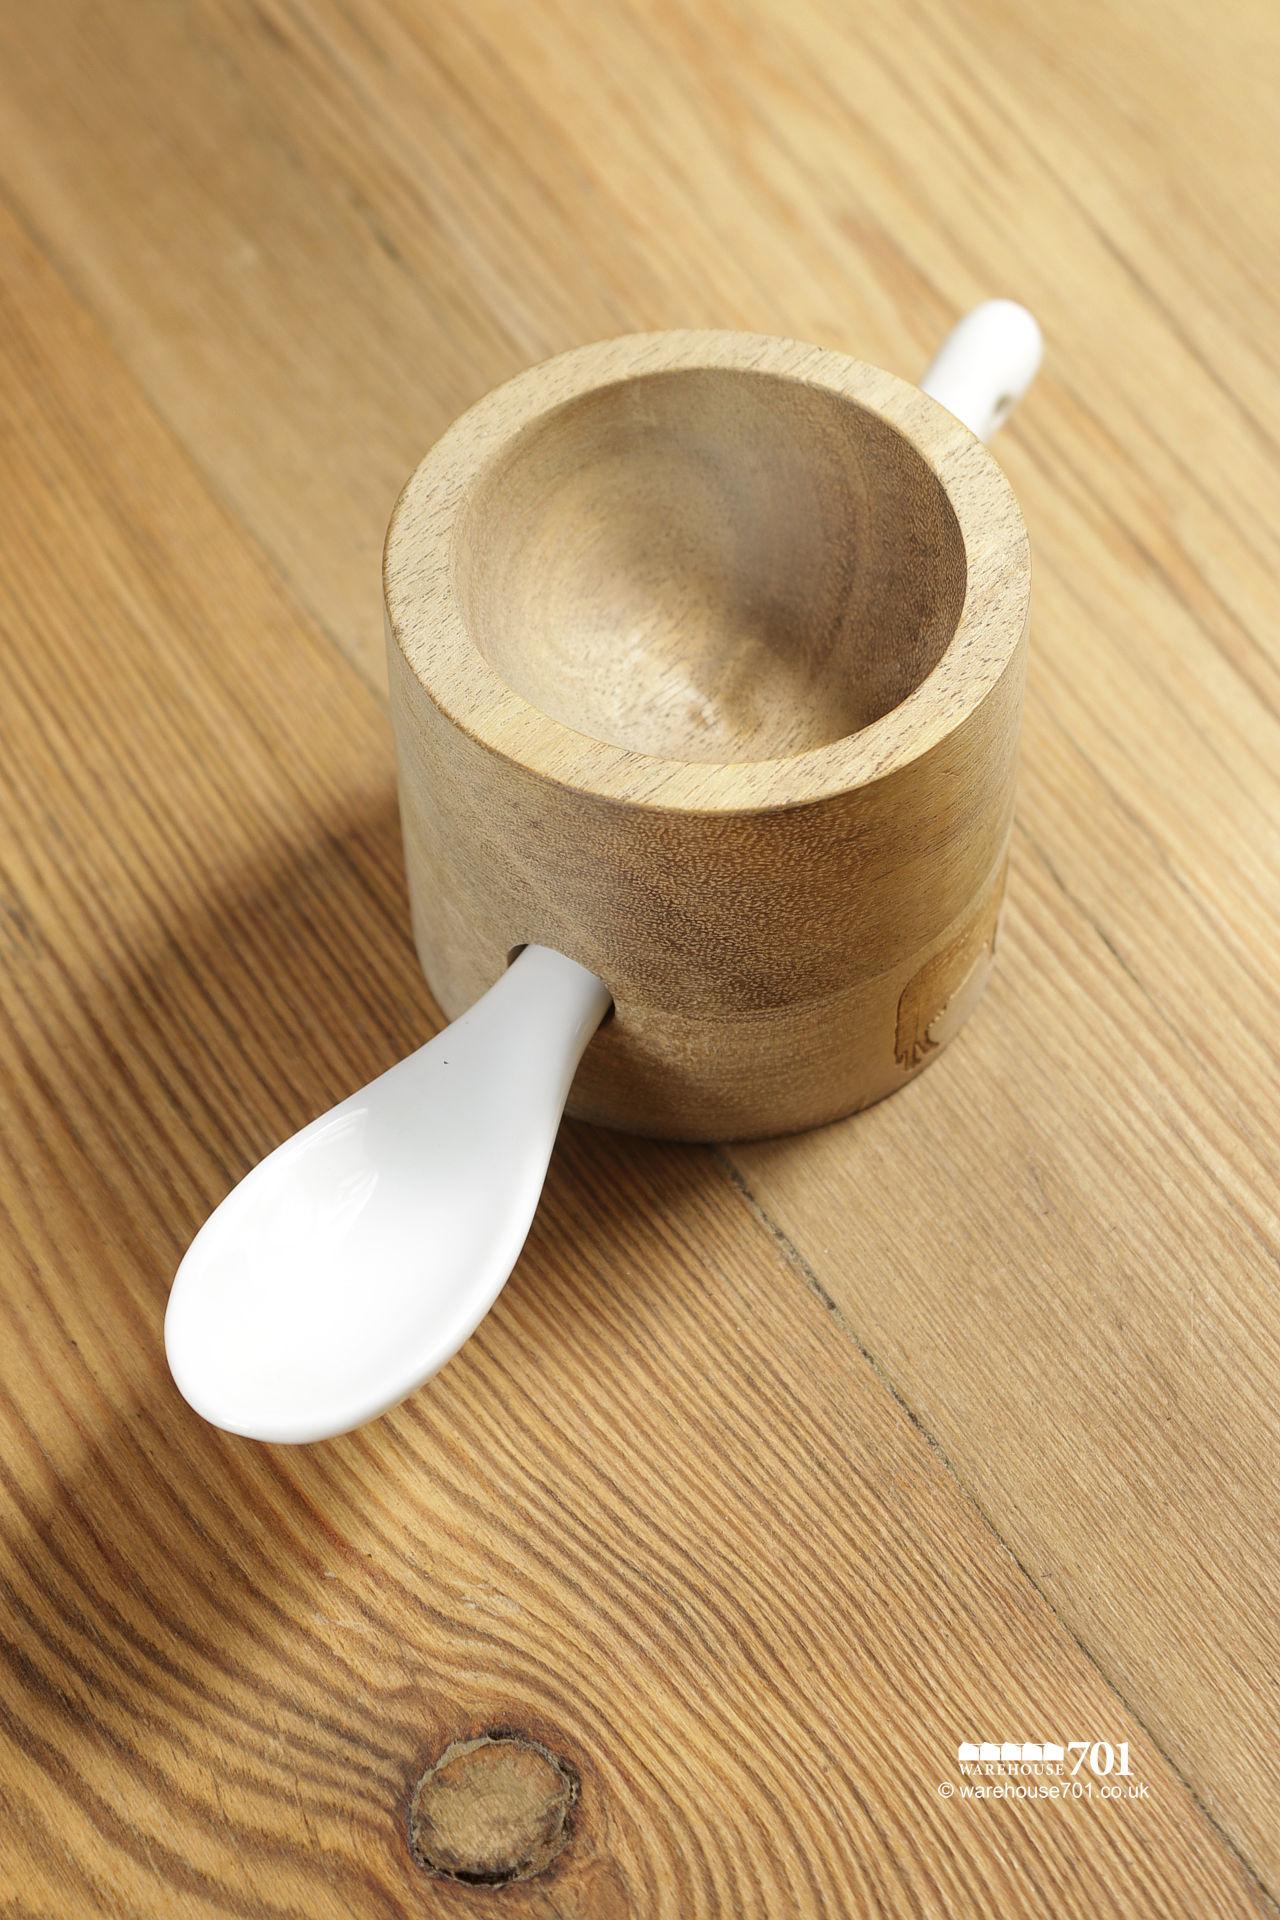 Cow Motif Wooden Egg Cup and Ceramic Spoon #1